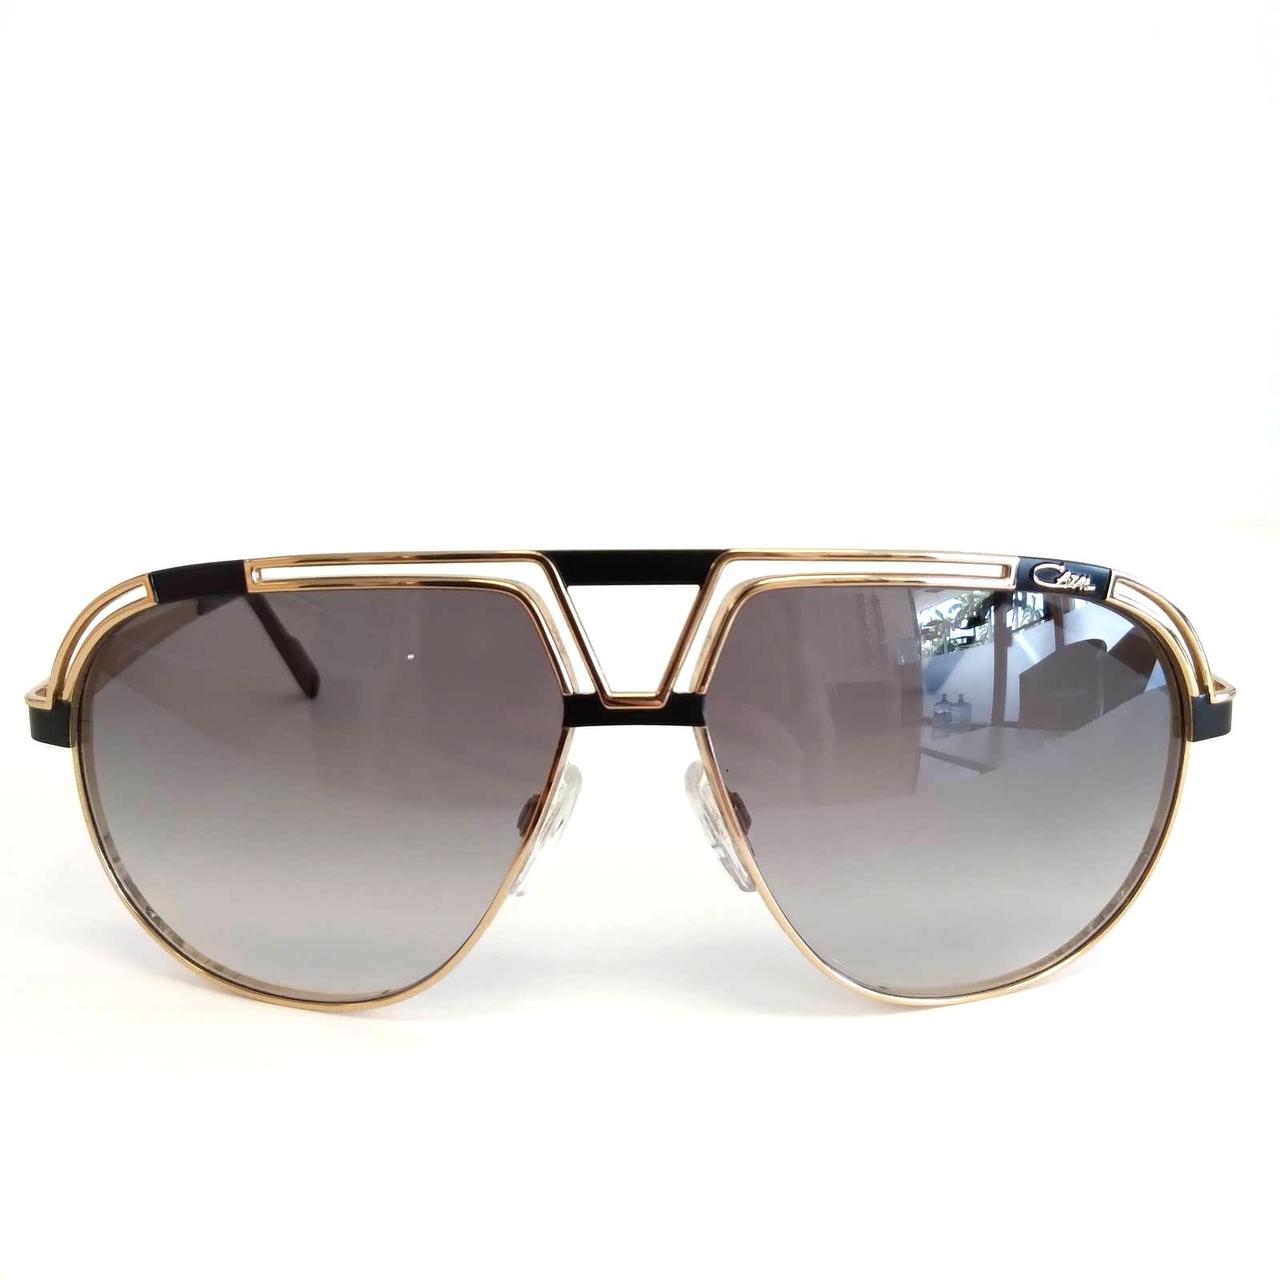 Product Image 3 - Brand: Cazal
Model: 9100
Style: Pilot
Frame/Temple Color: